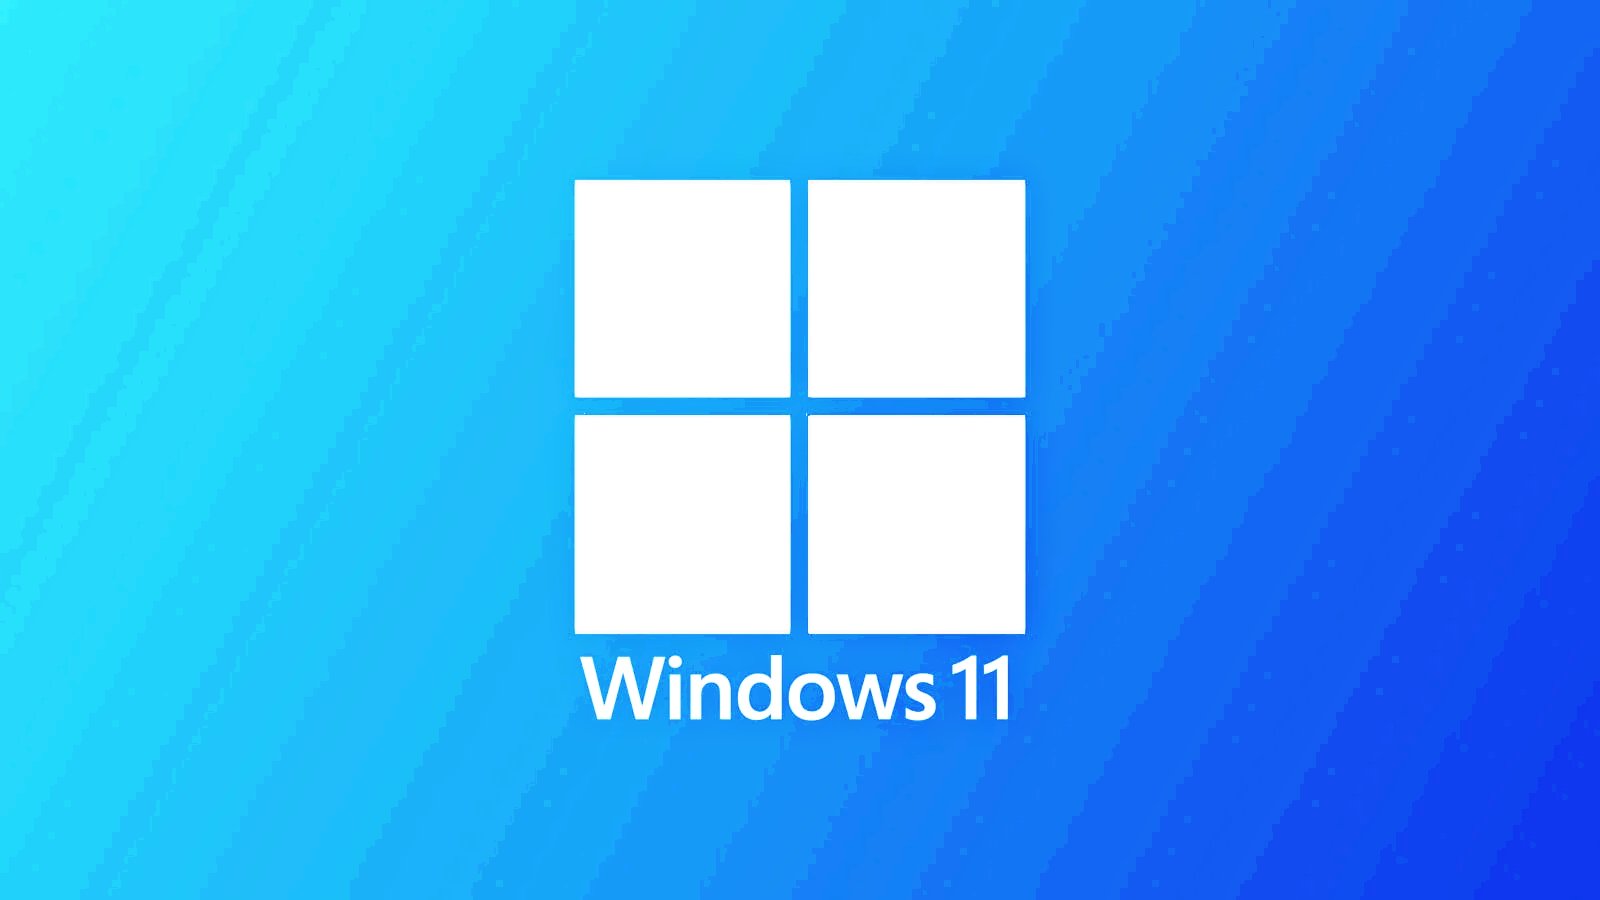 Windows 11 adds support for 11 file archives, including 7-Zip and RAR